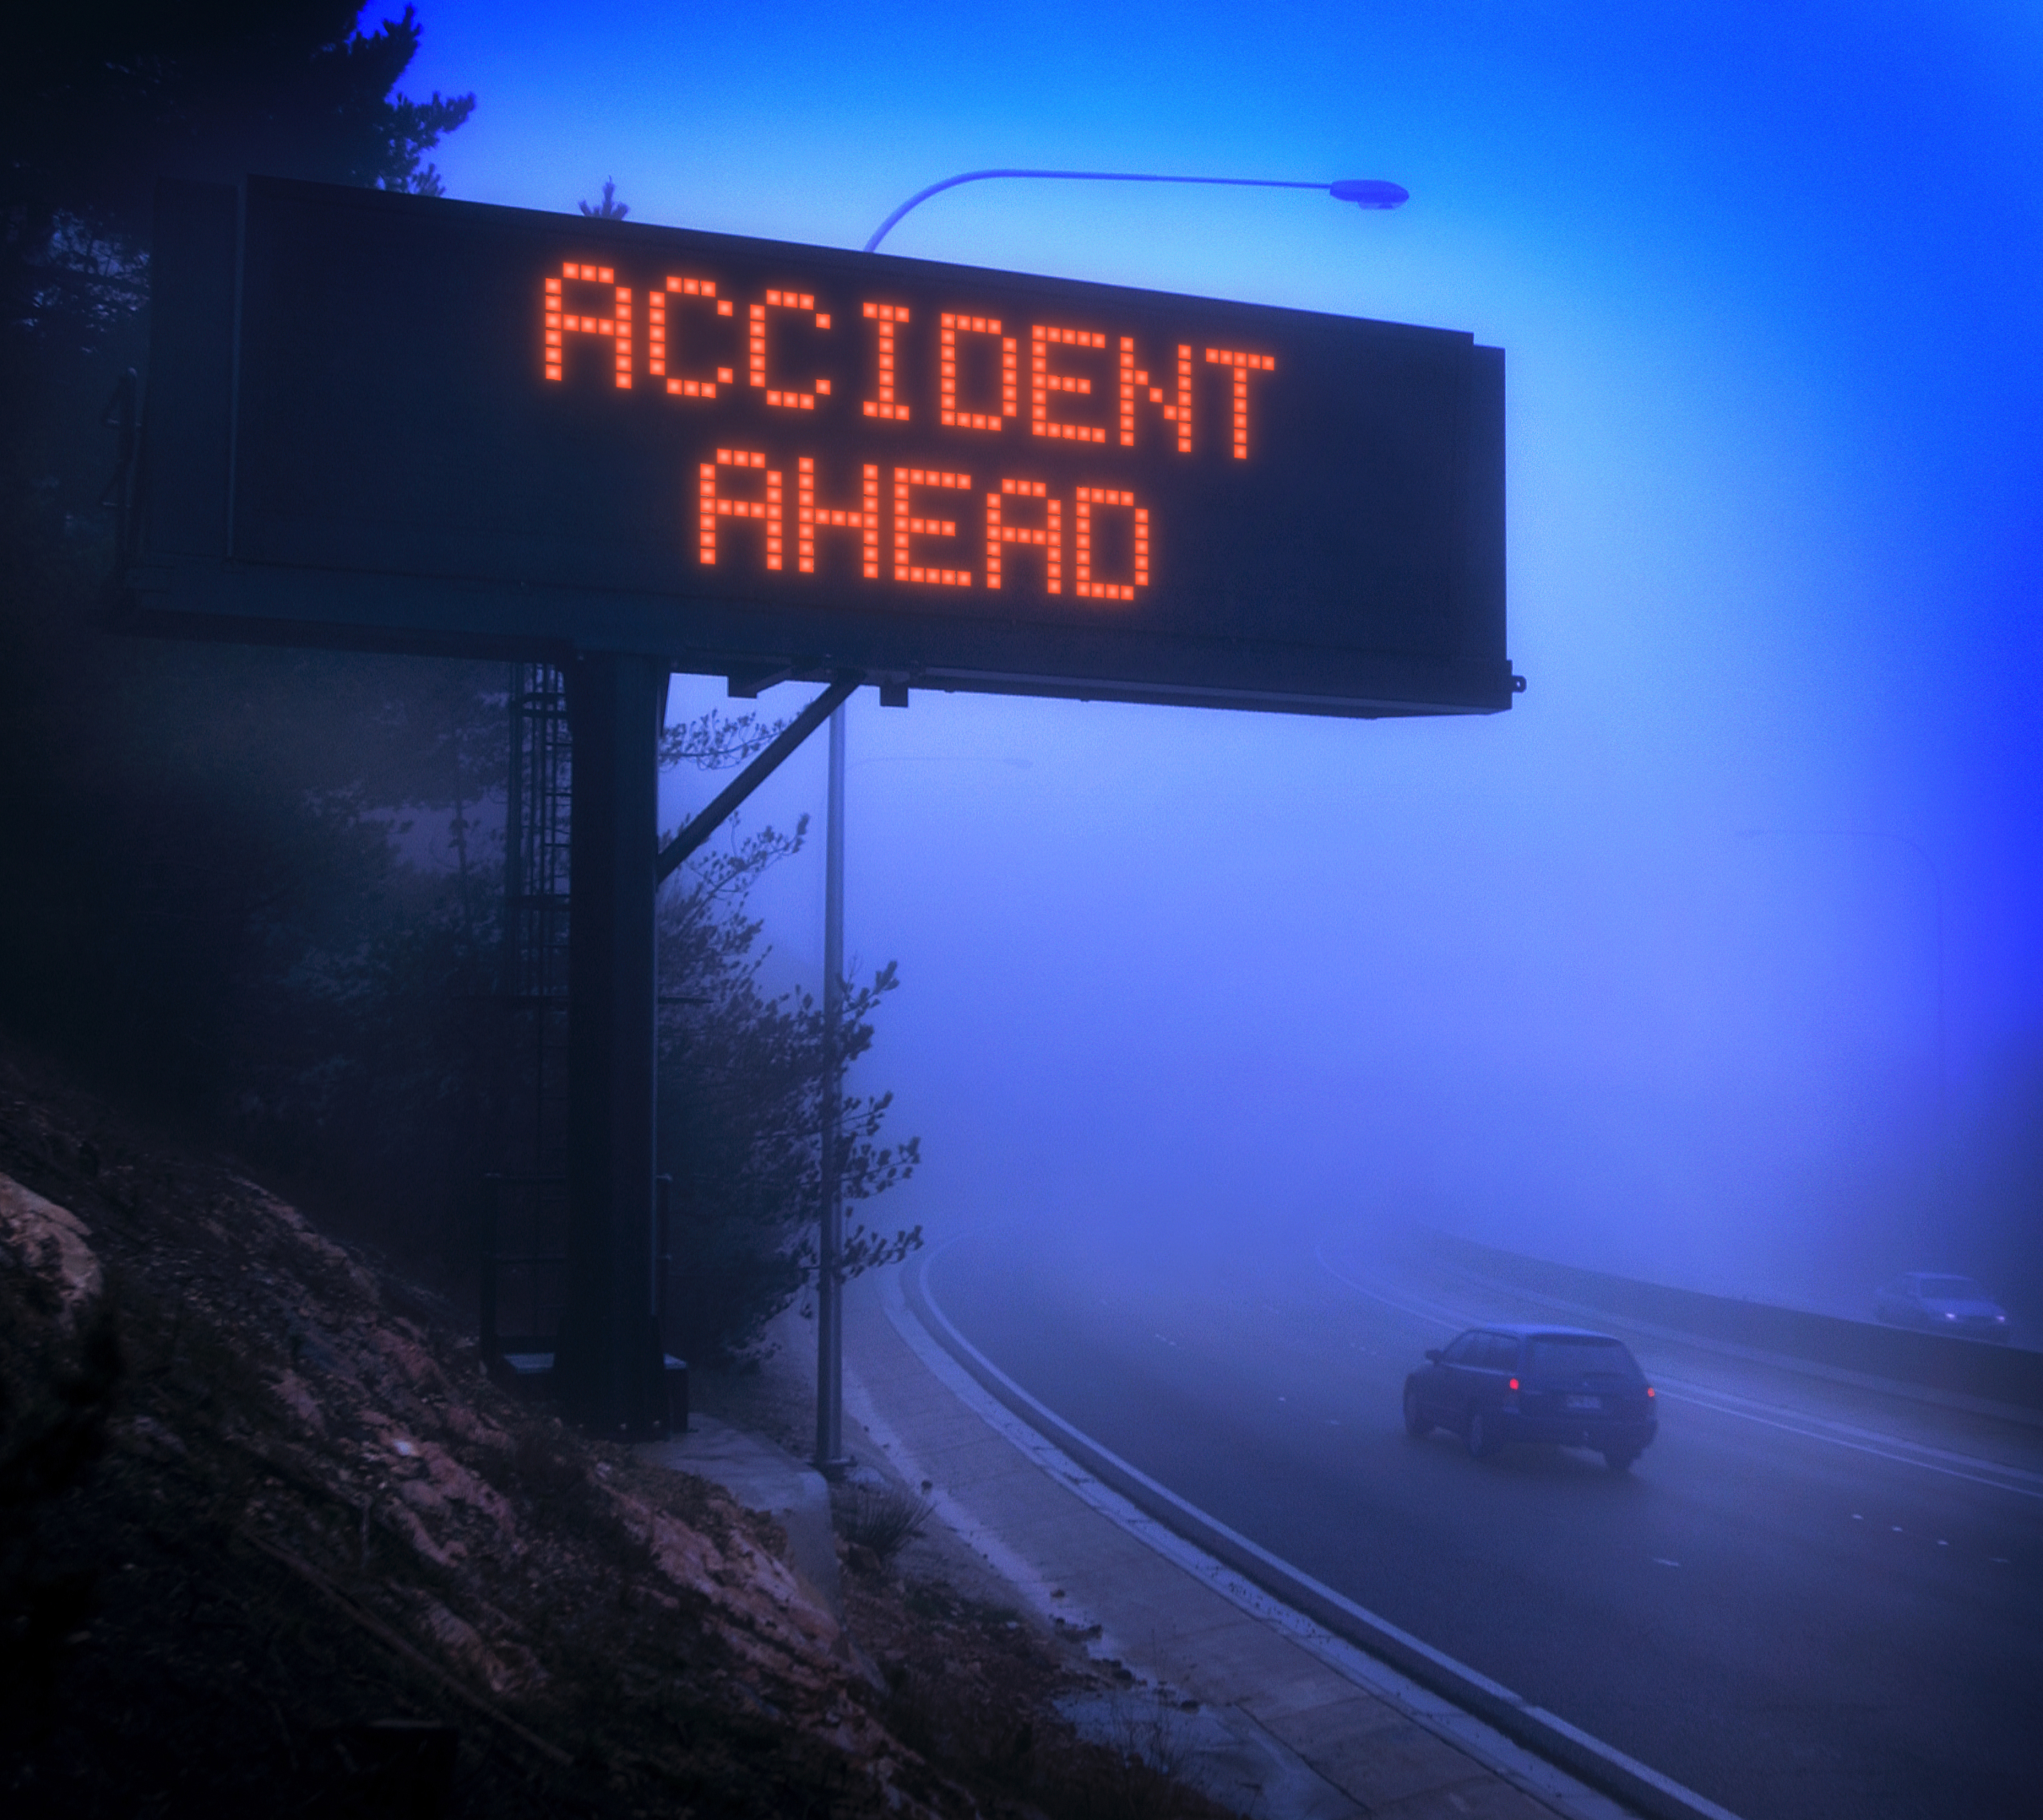 How To Drive In Bad Weather - accident ahead sign foggy mountain road.